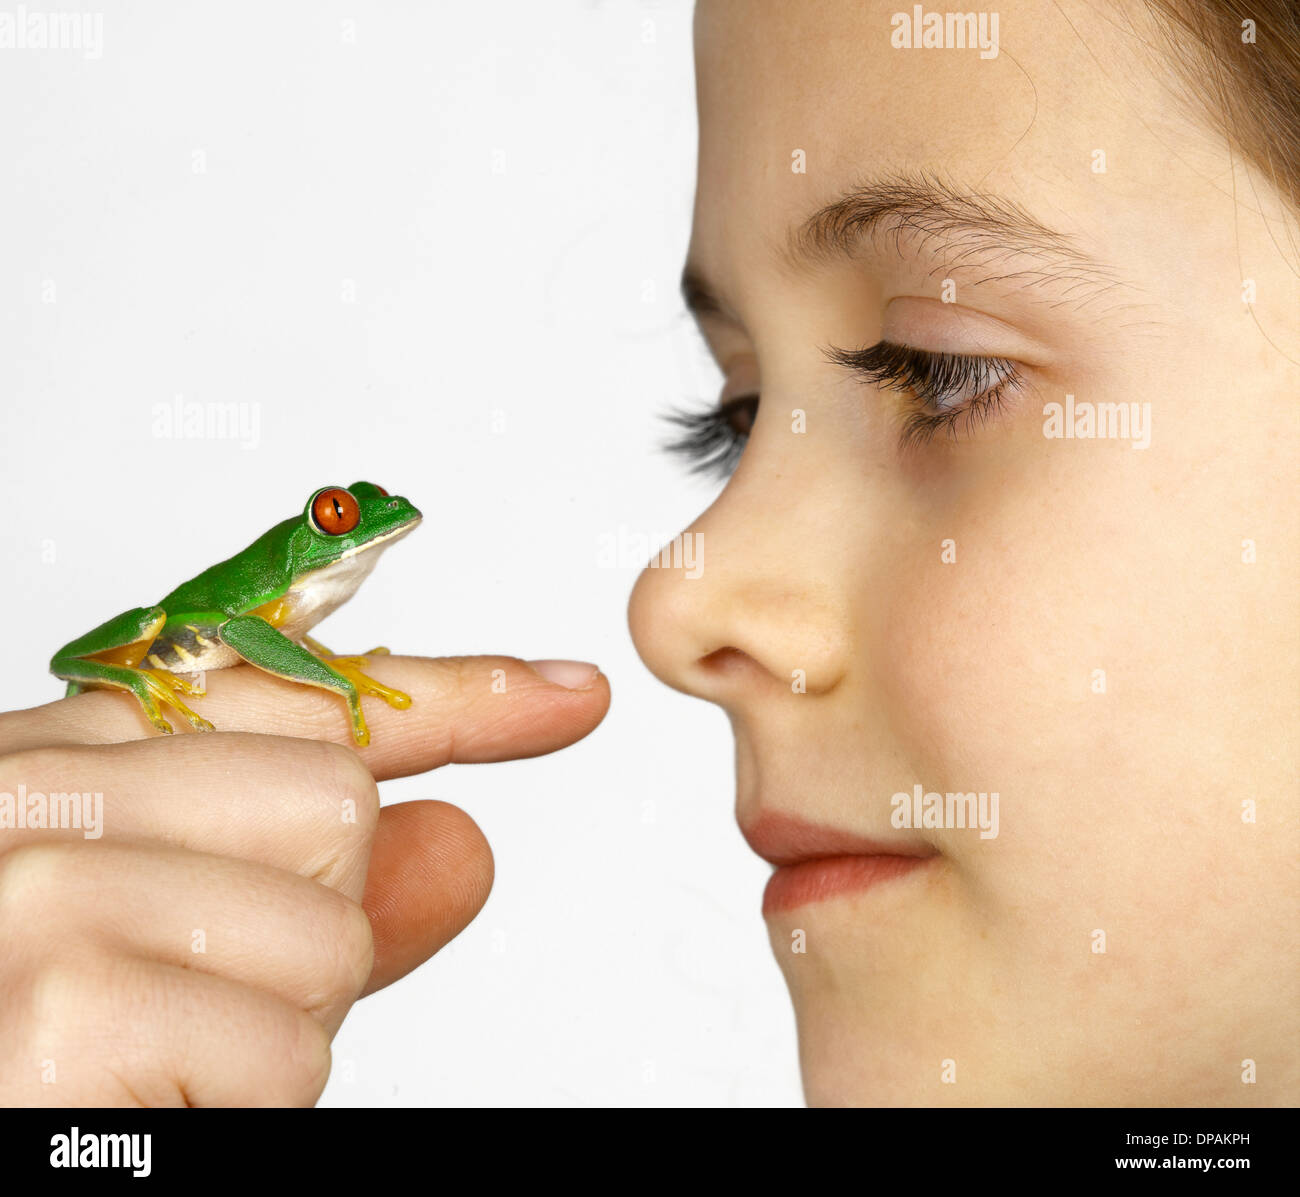 Girl with a red-eyed tree frog on her finger Stock Photo